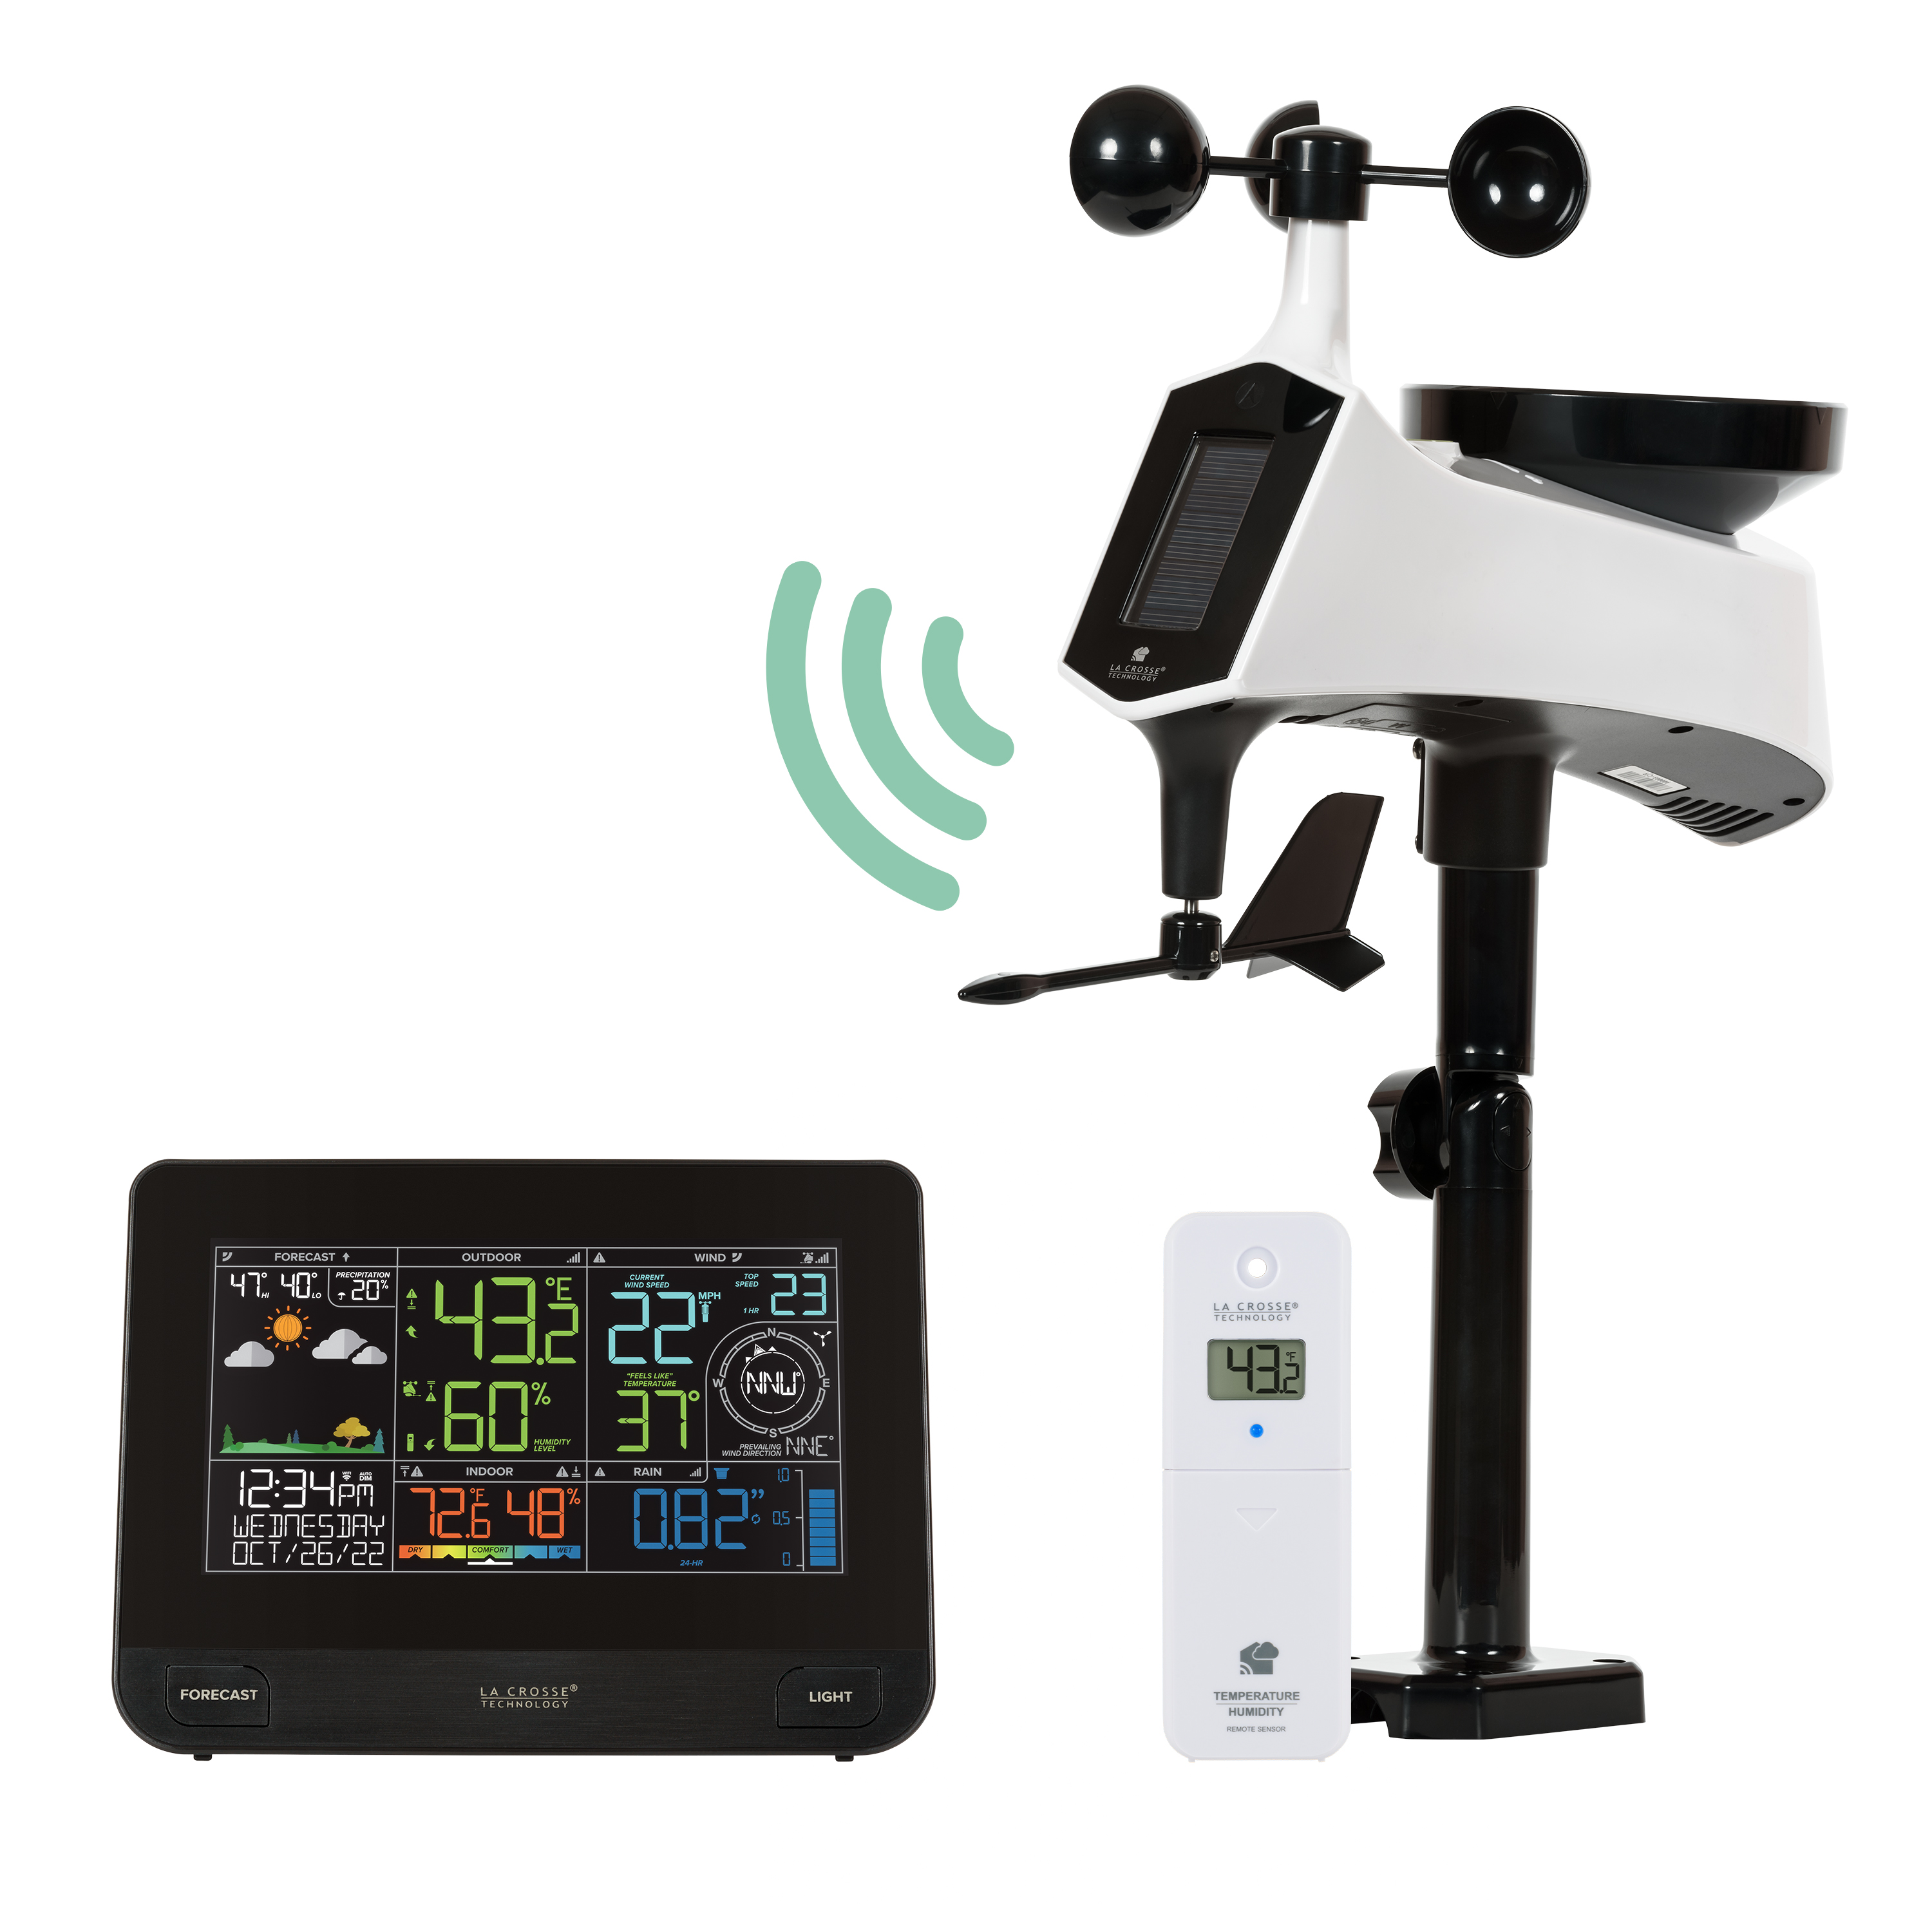 LTV-TH2 LaCrosse Thermo-Hygro Sensor Weather Stations Fast